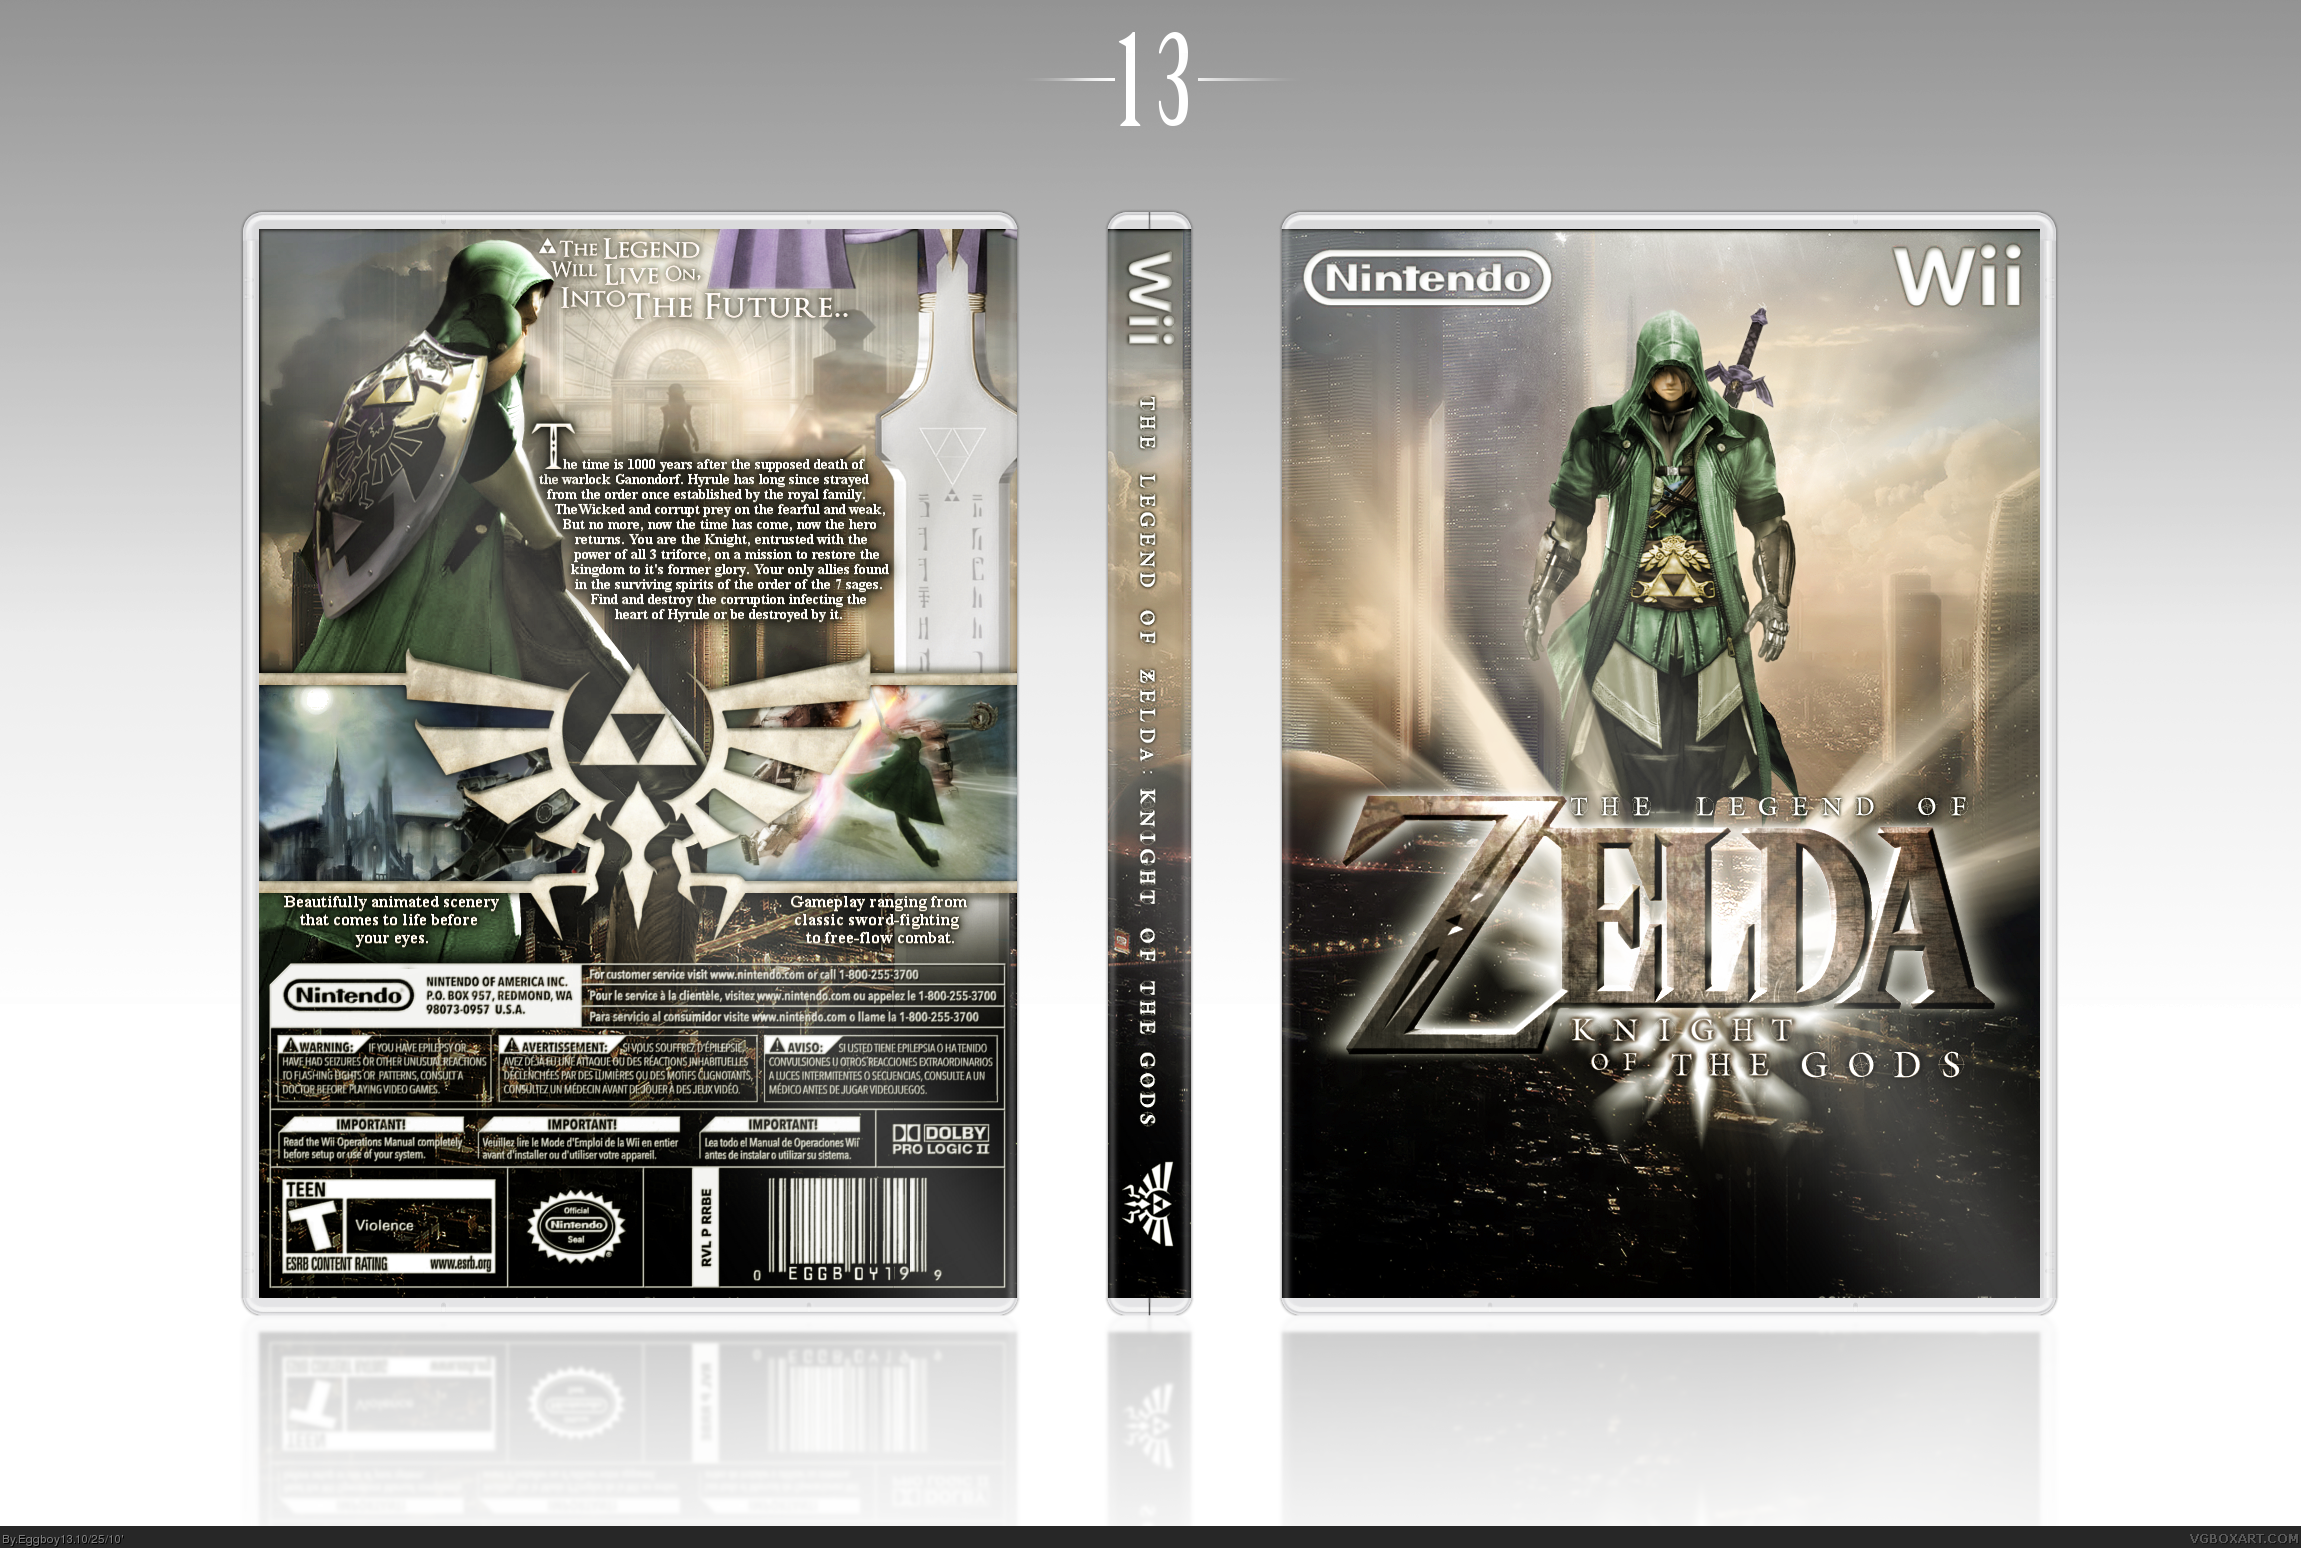 The Legend of Zelda: Knight of The Gods box cover